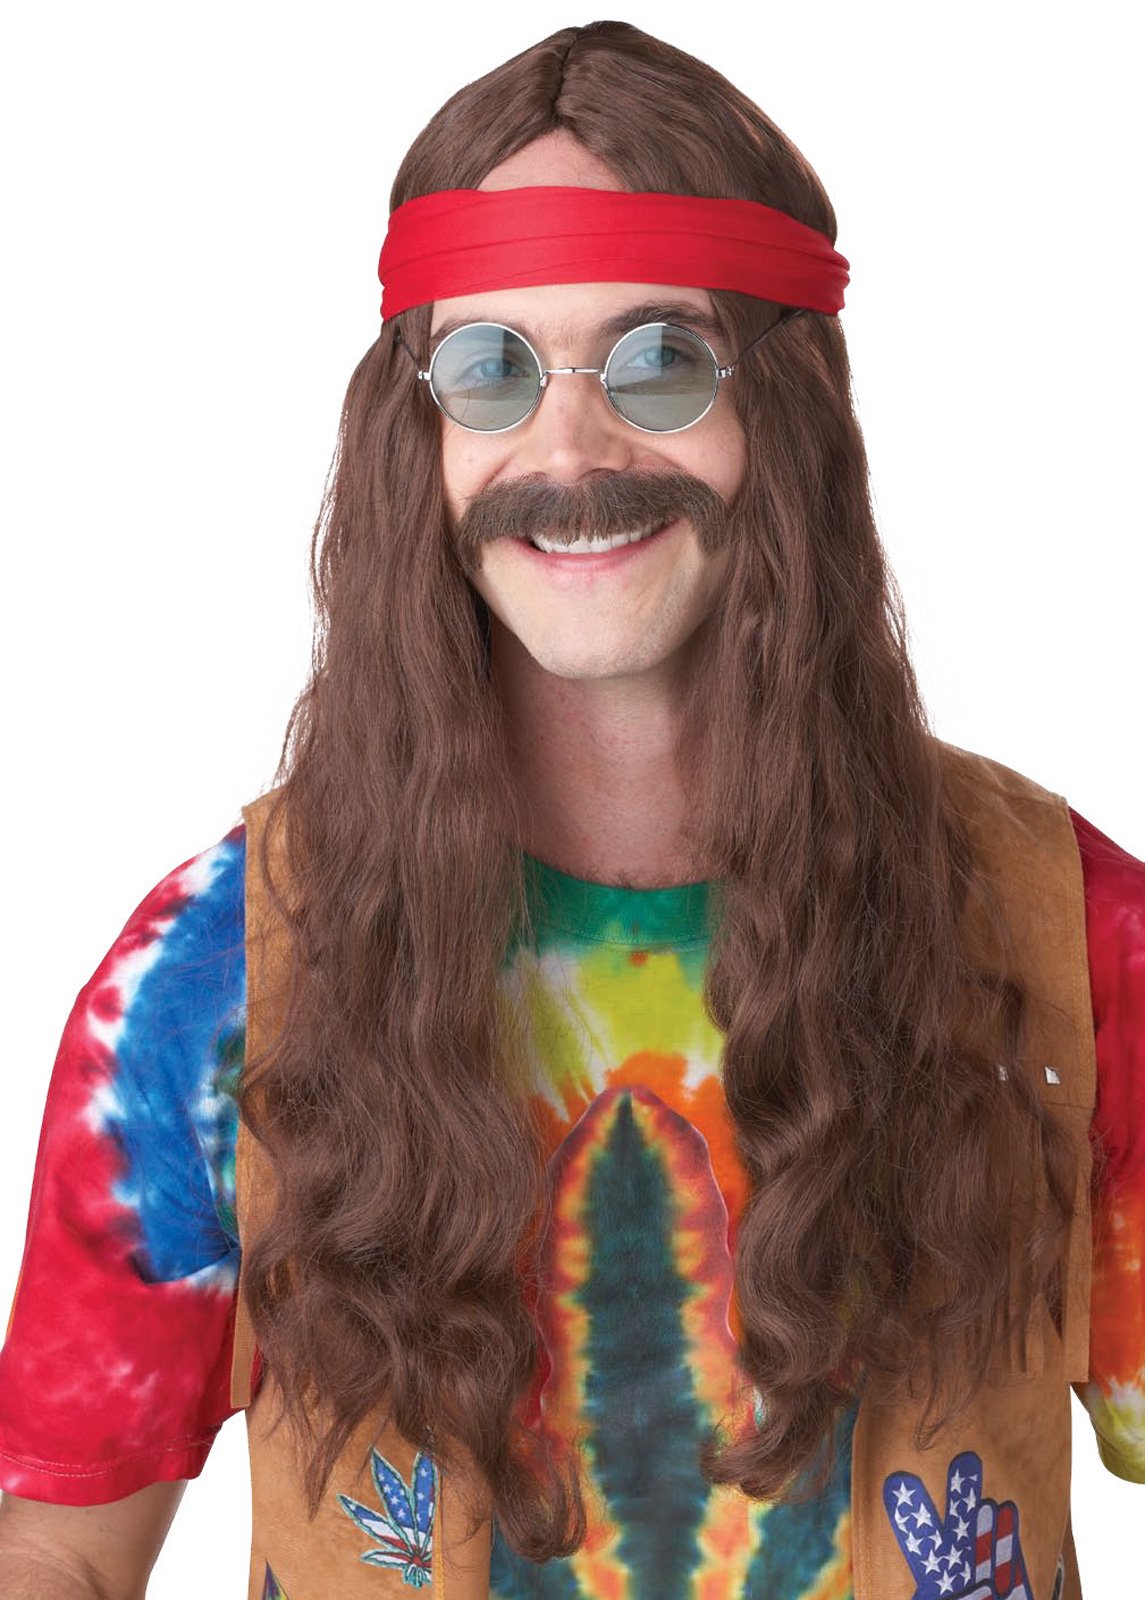 Hippie Man (Brown) Adult Wig and Moustache